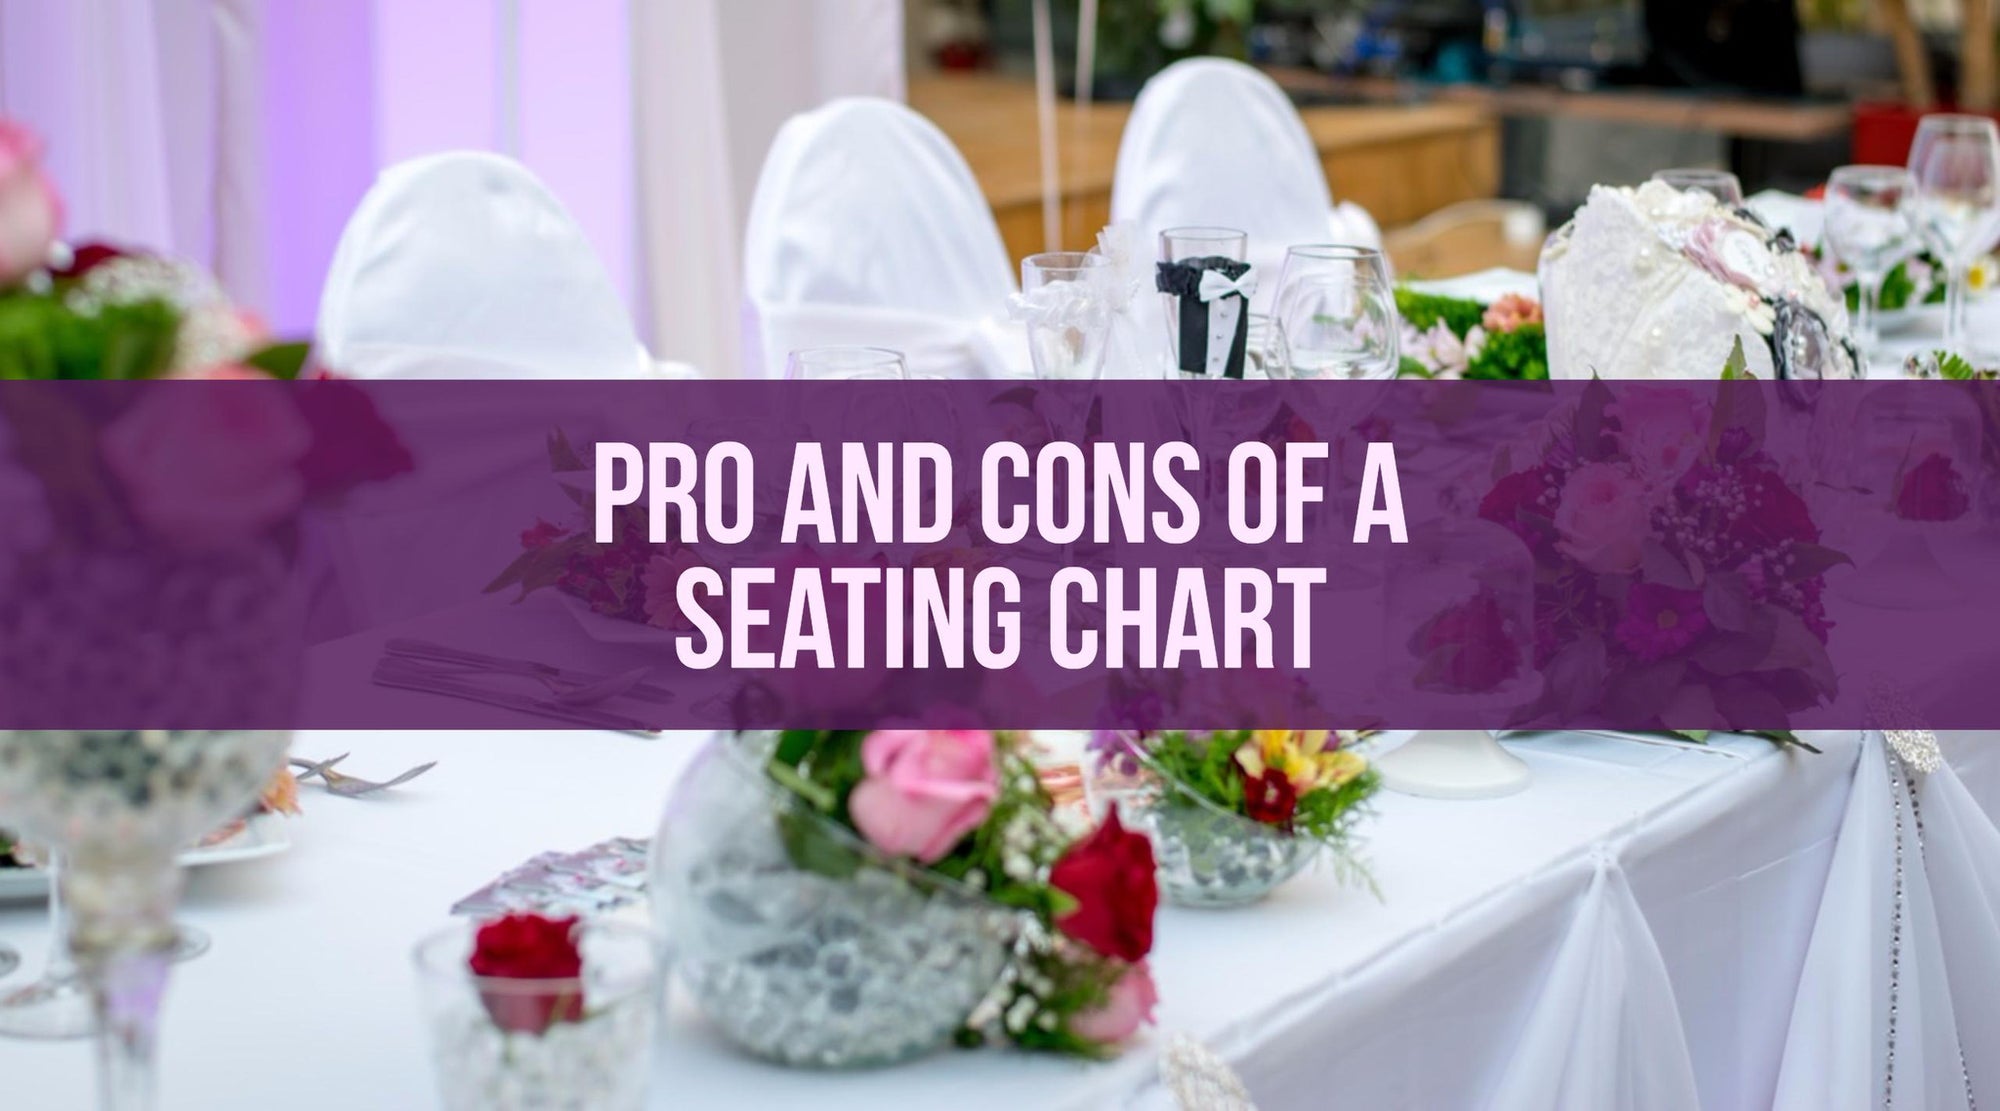 The Pros and Cons of a Seating Chart